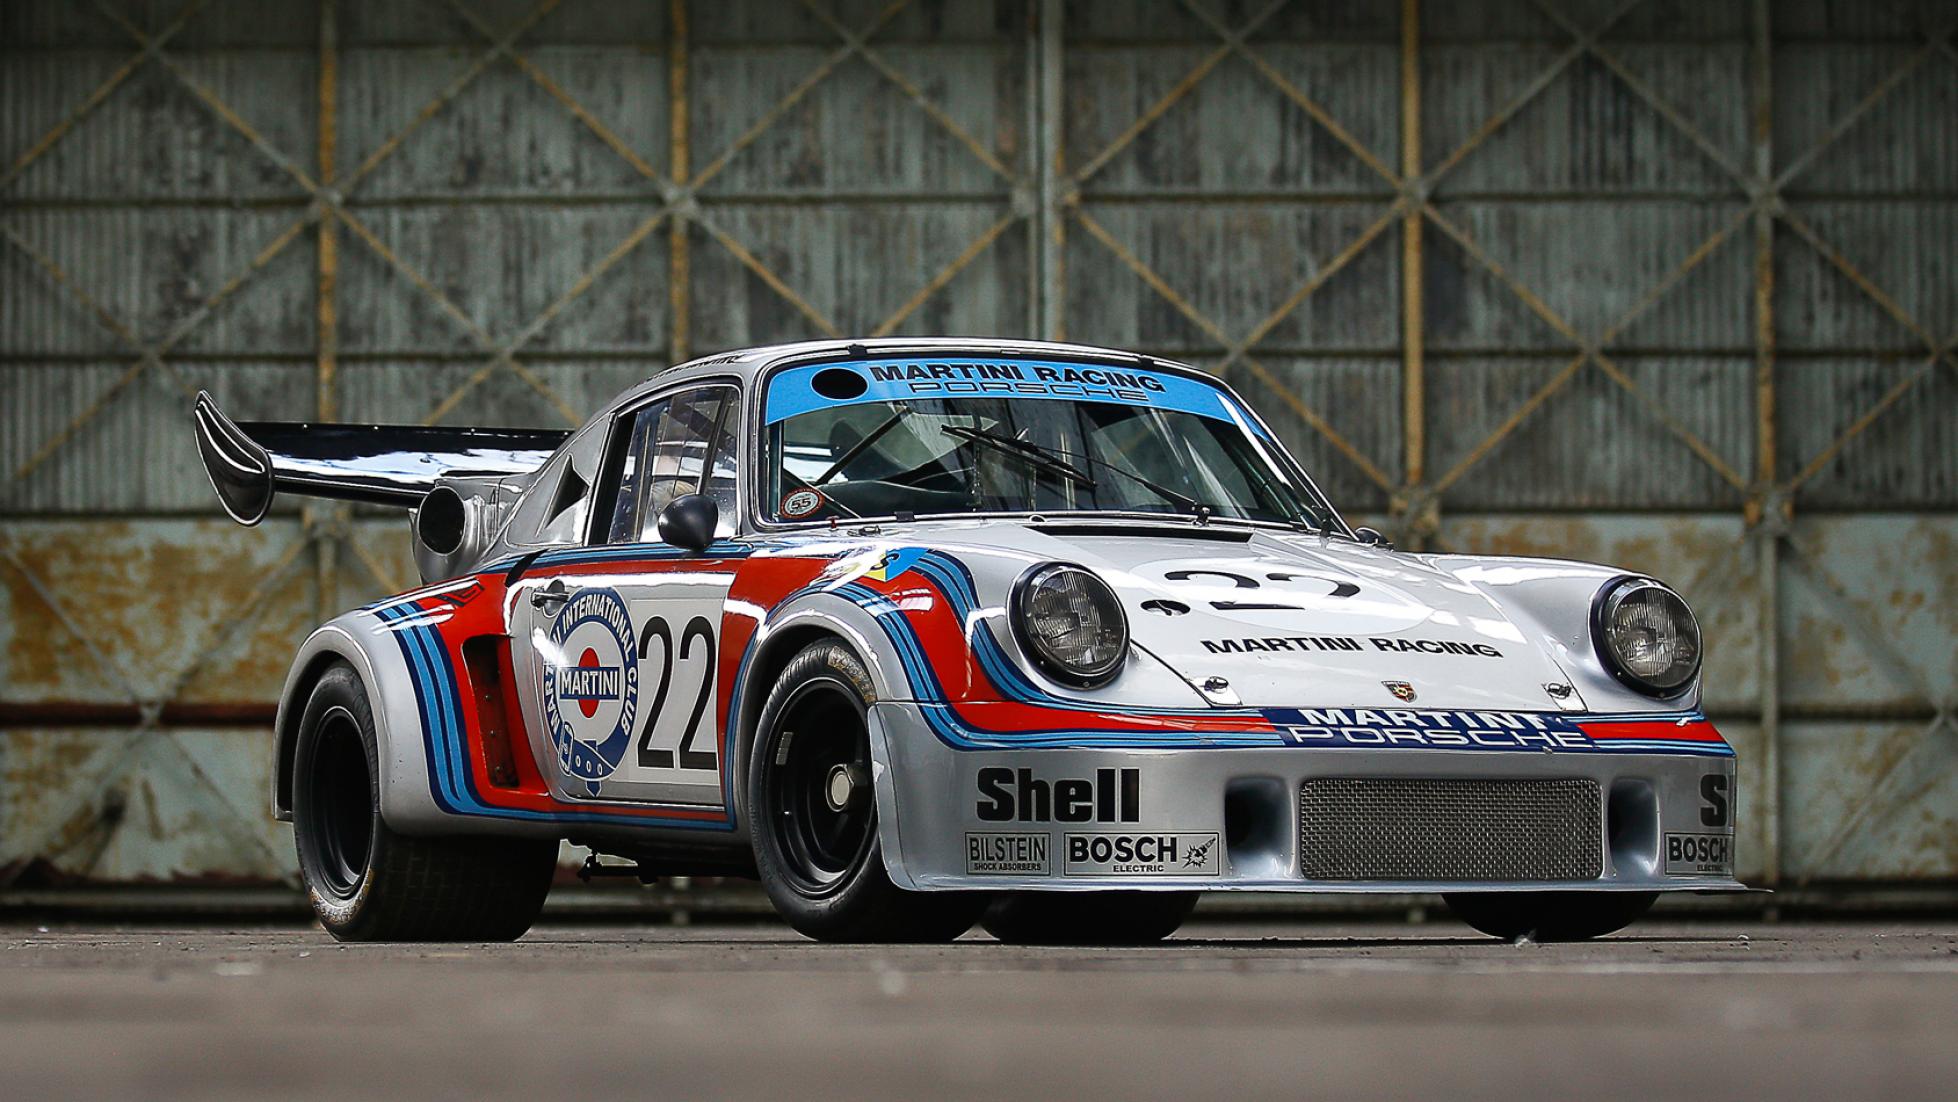 16 of the Greatest American Race Cars of All Time